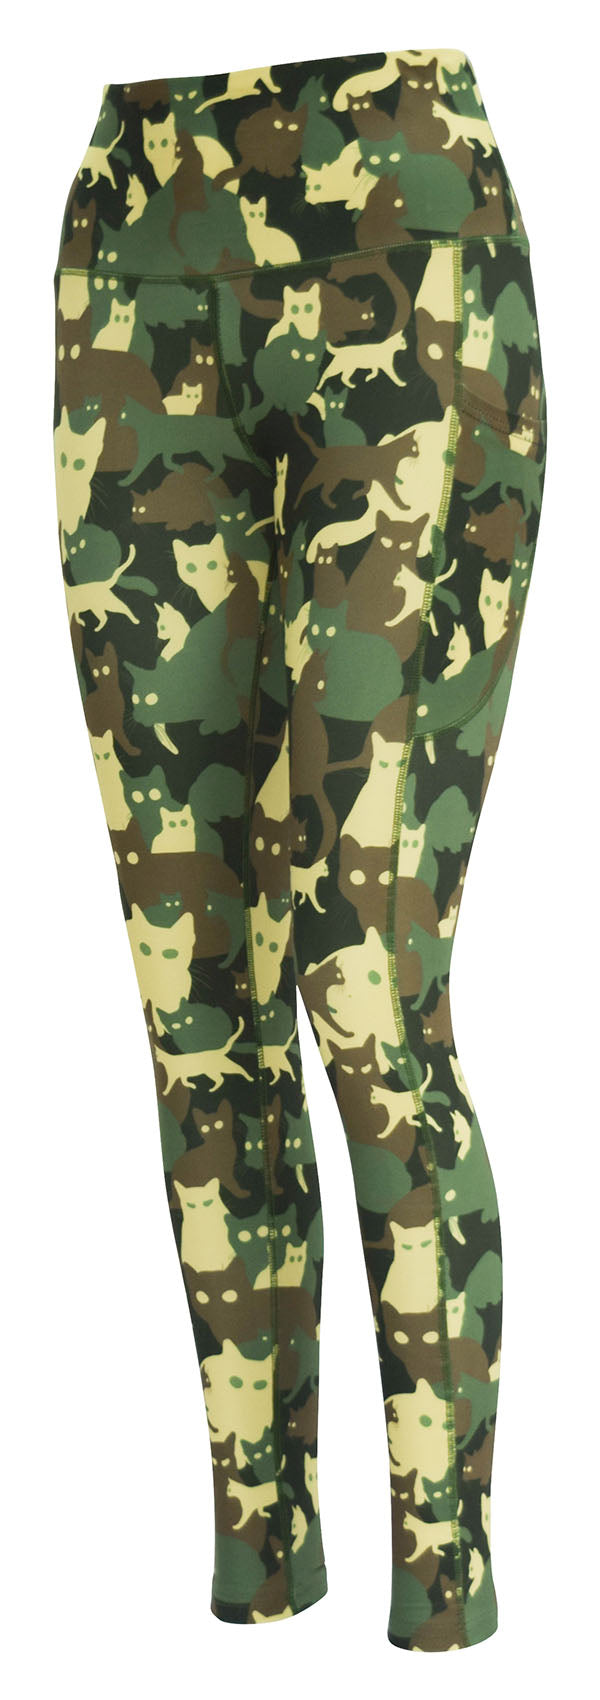 Turquoise Camouflage Leggings with Pockets, Camo Leggings by Stitch &  Simon - Sustainable Outdoor Clothing, Camouflage Gear, Stitch & Simon